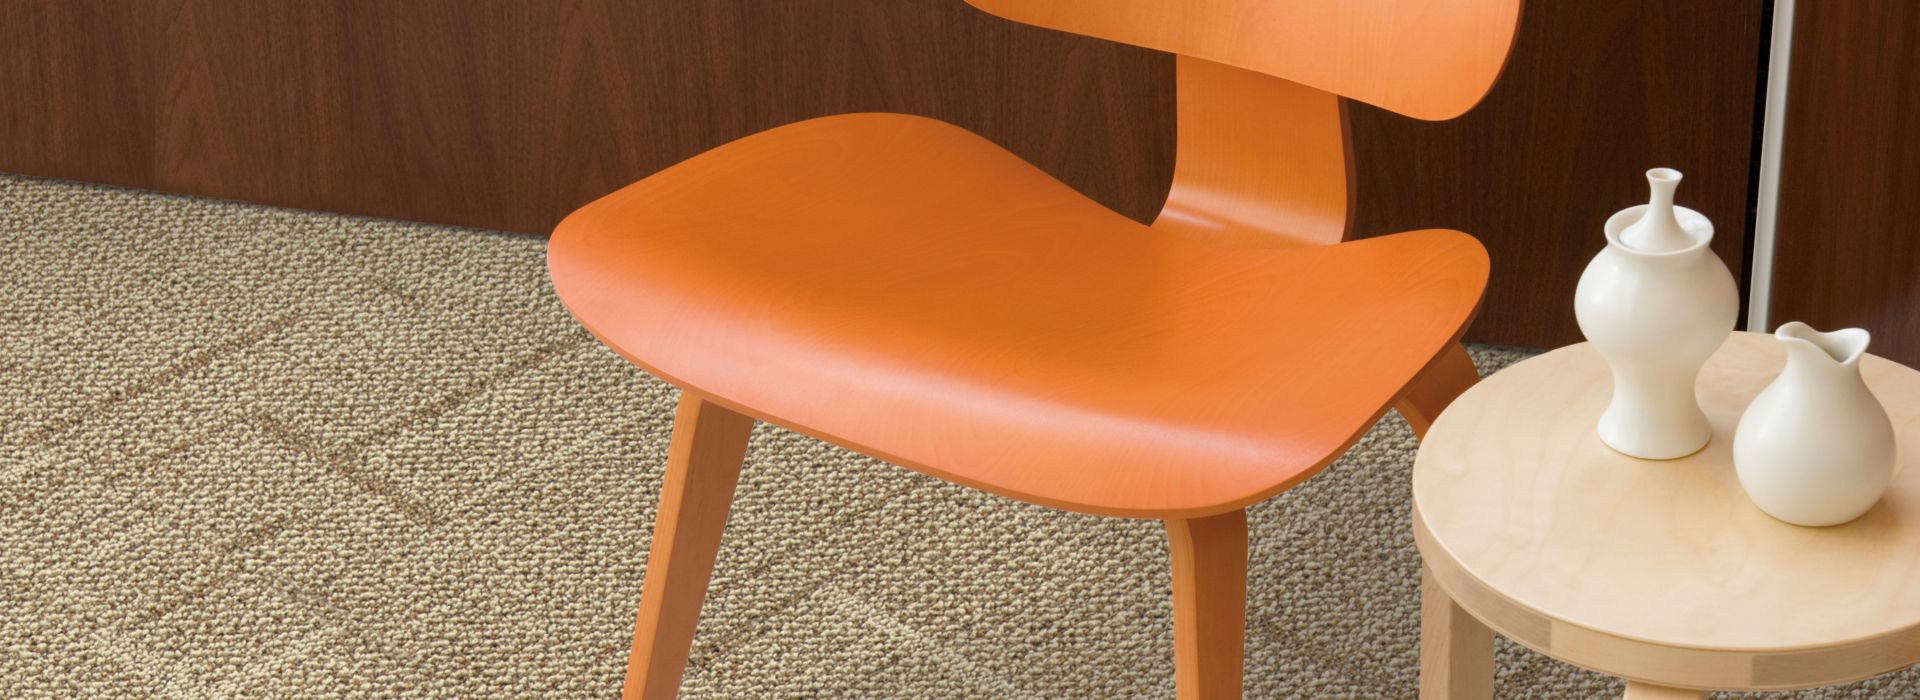 Interface Furrows II carpet tile detail with wood chair